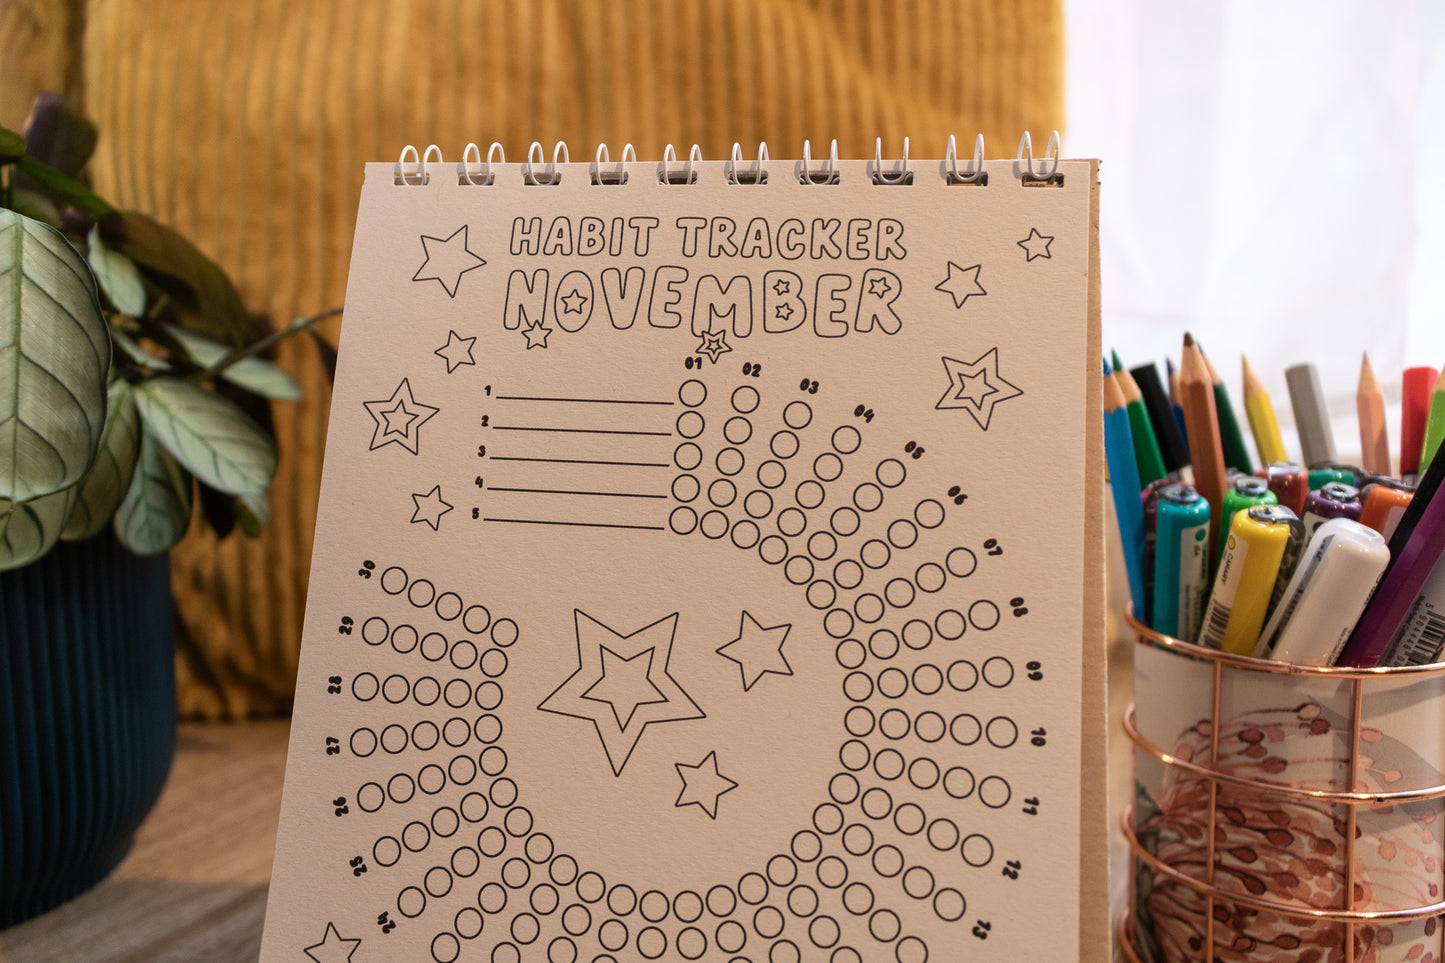 12-month Colouring Habit Tracker by MellowApricotStudio - A5 & A6 standing desk calendar - november page with stars